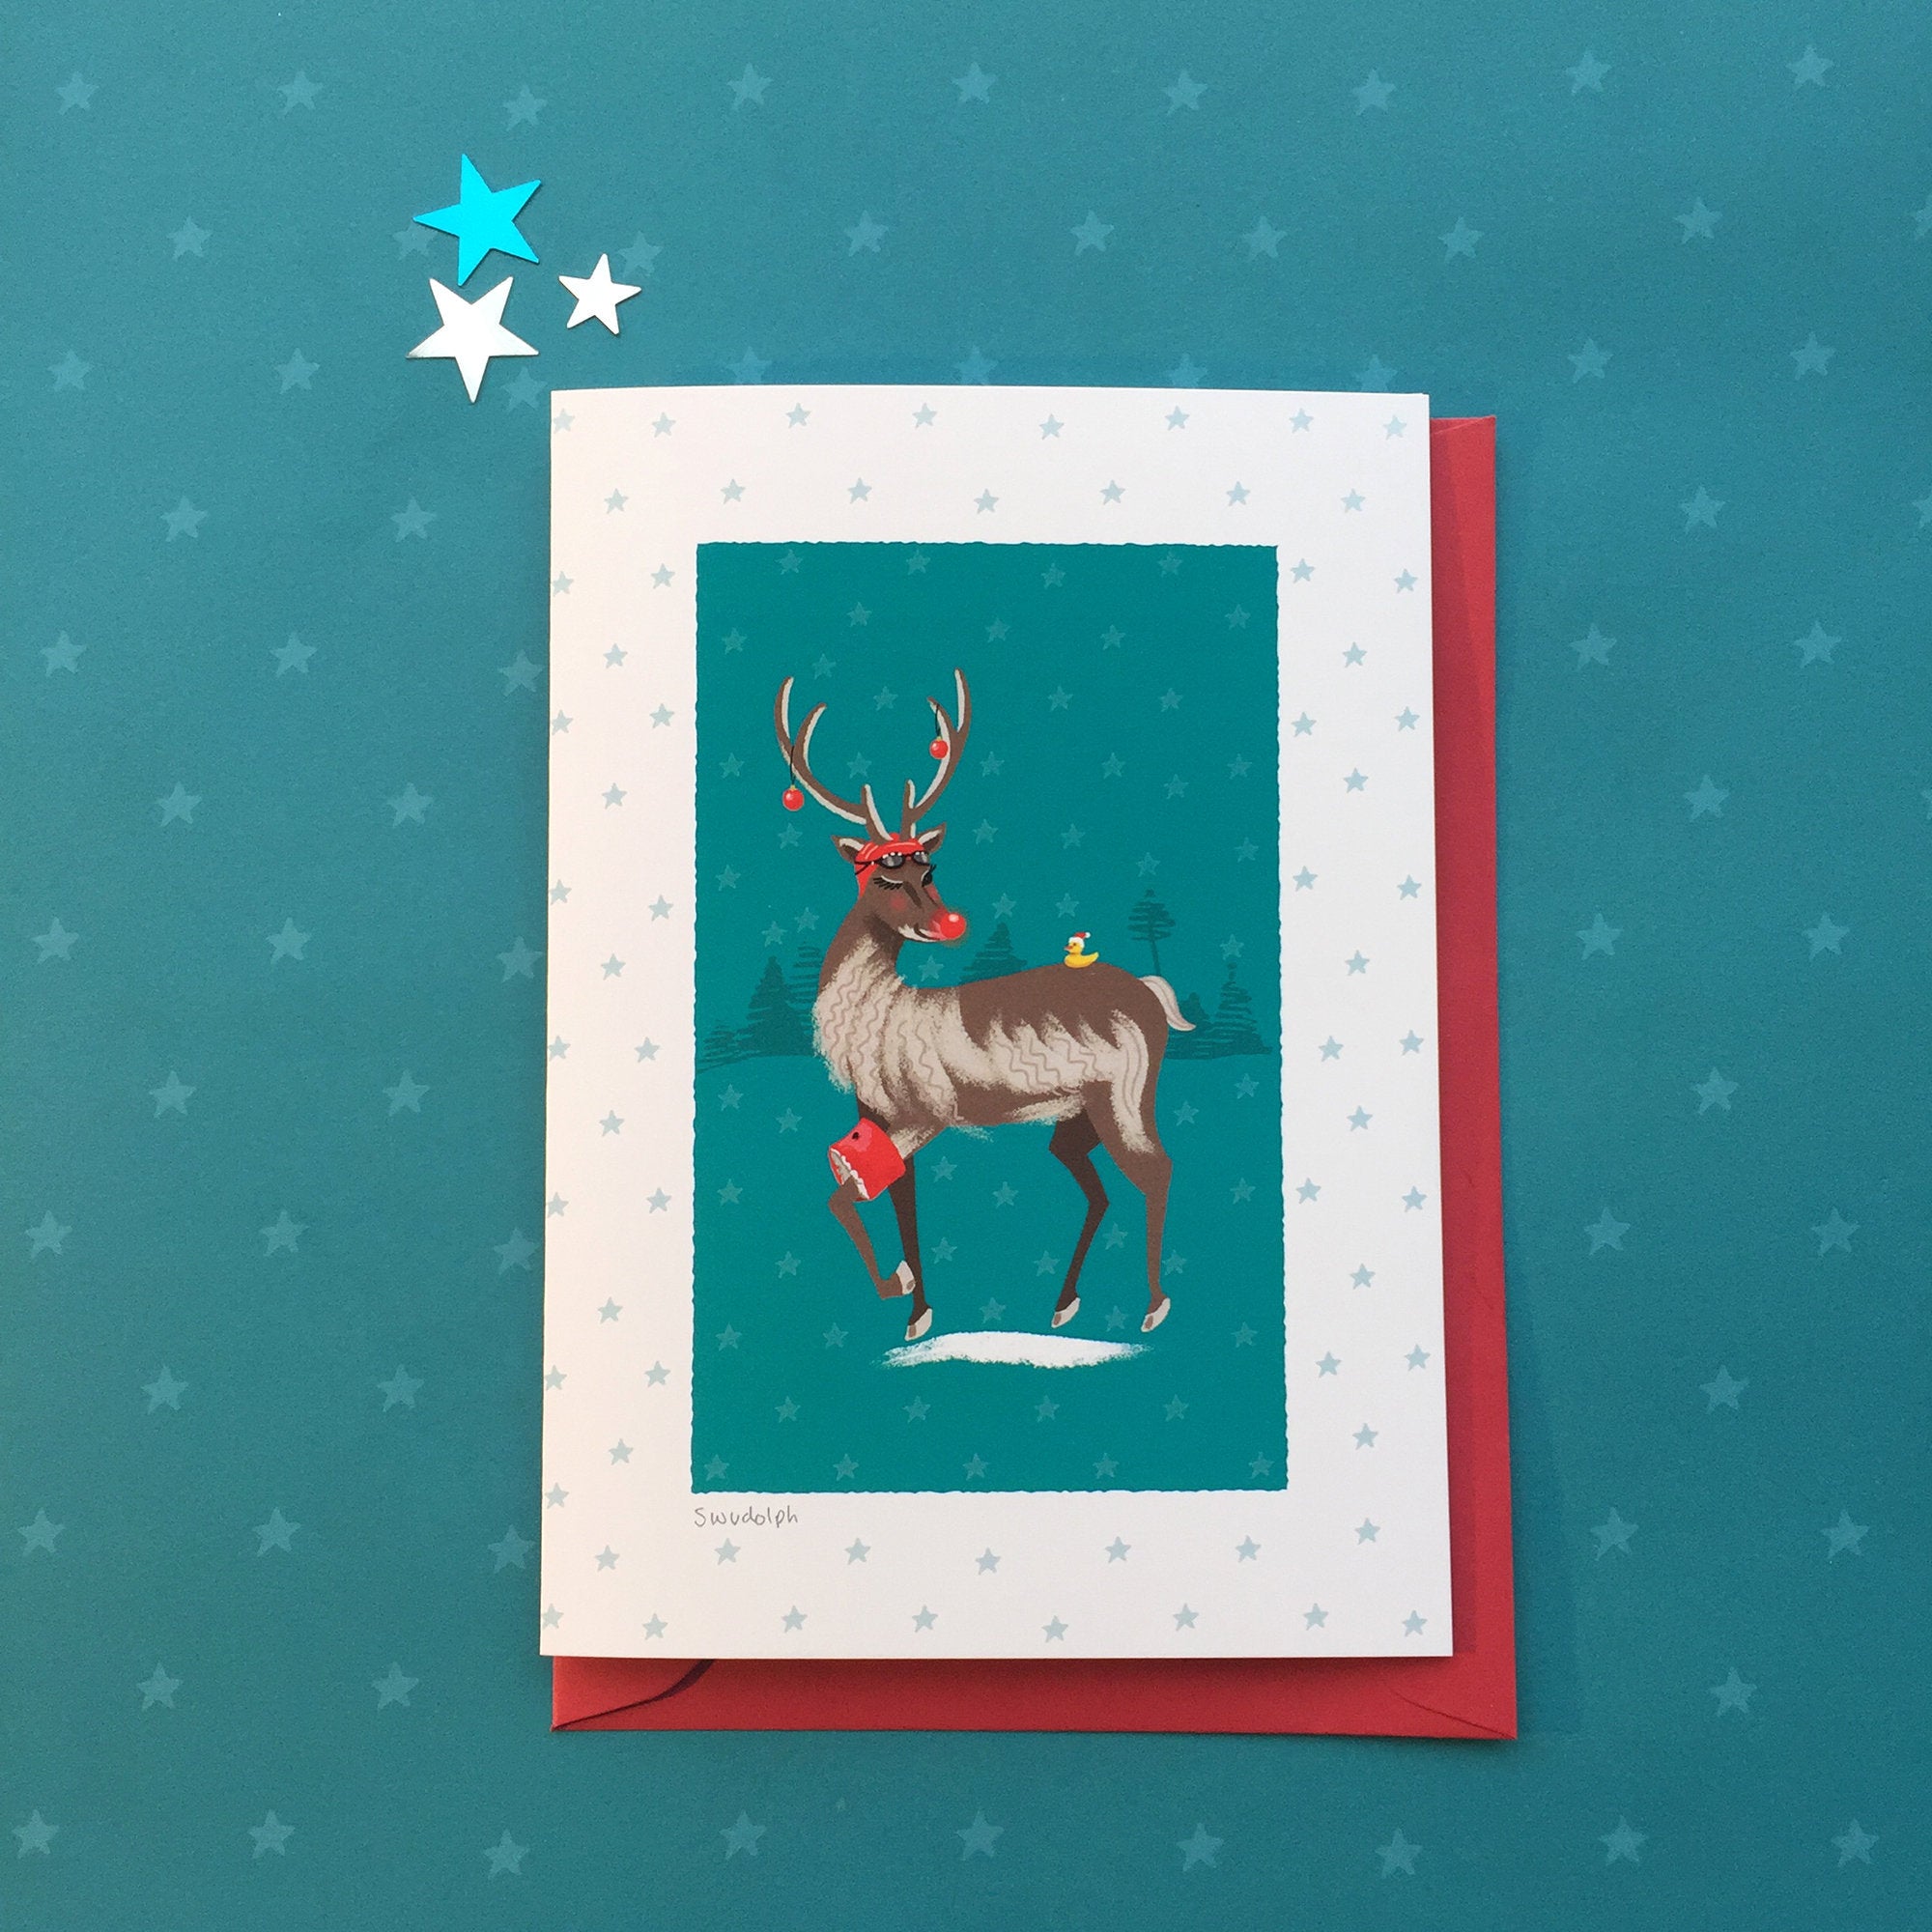 Swimming Rudolph. Christmas card for swimmers